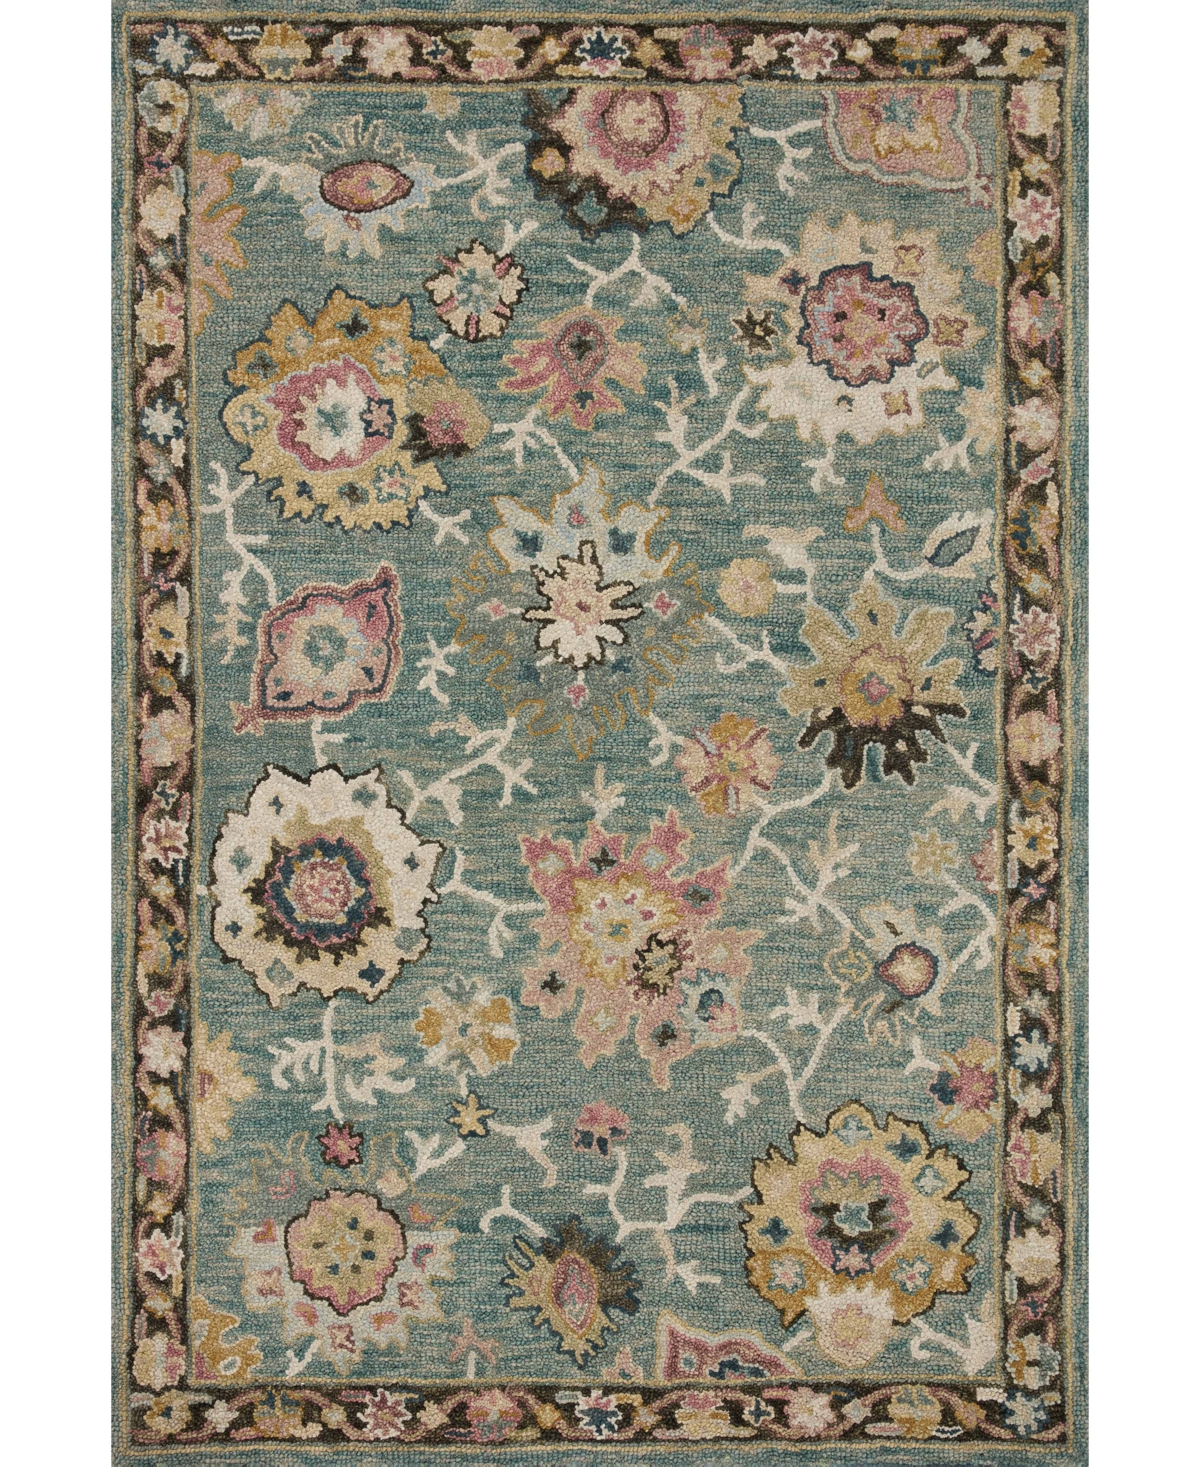 Spring Valley Home Lotus Lts-04 2'3" X 3'9" Area Rug In Teal/multi